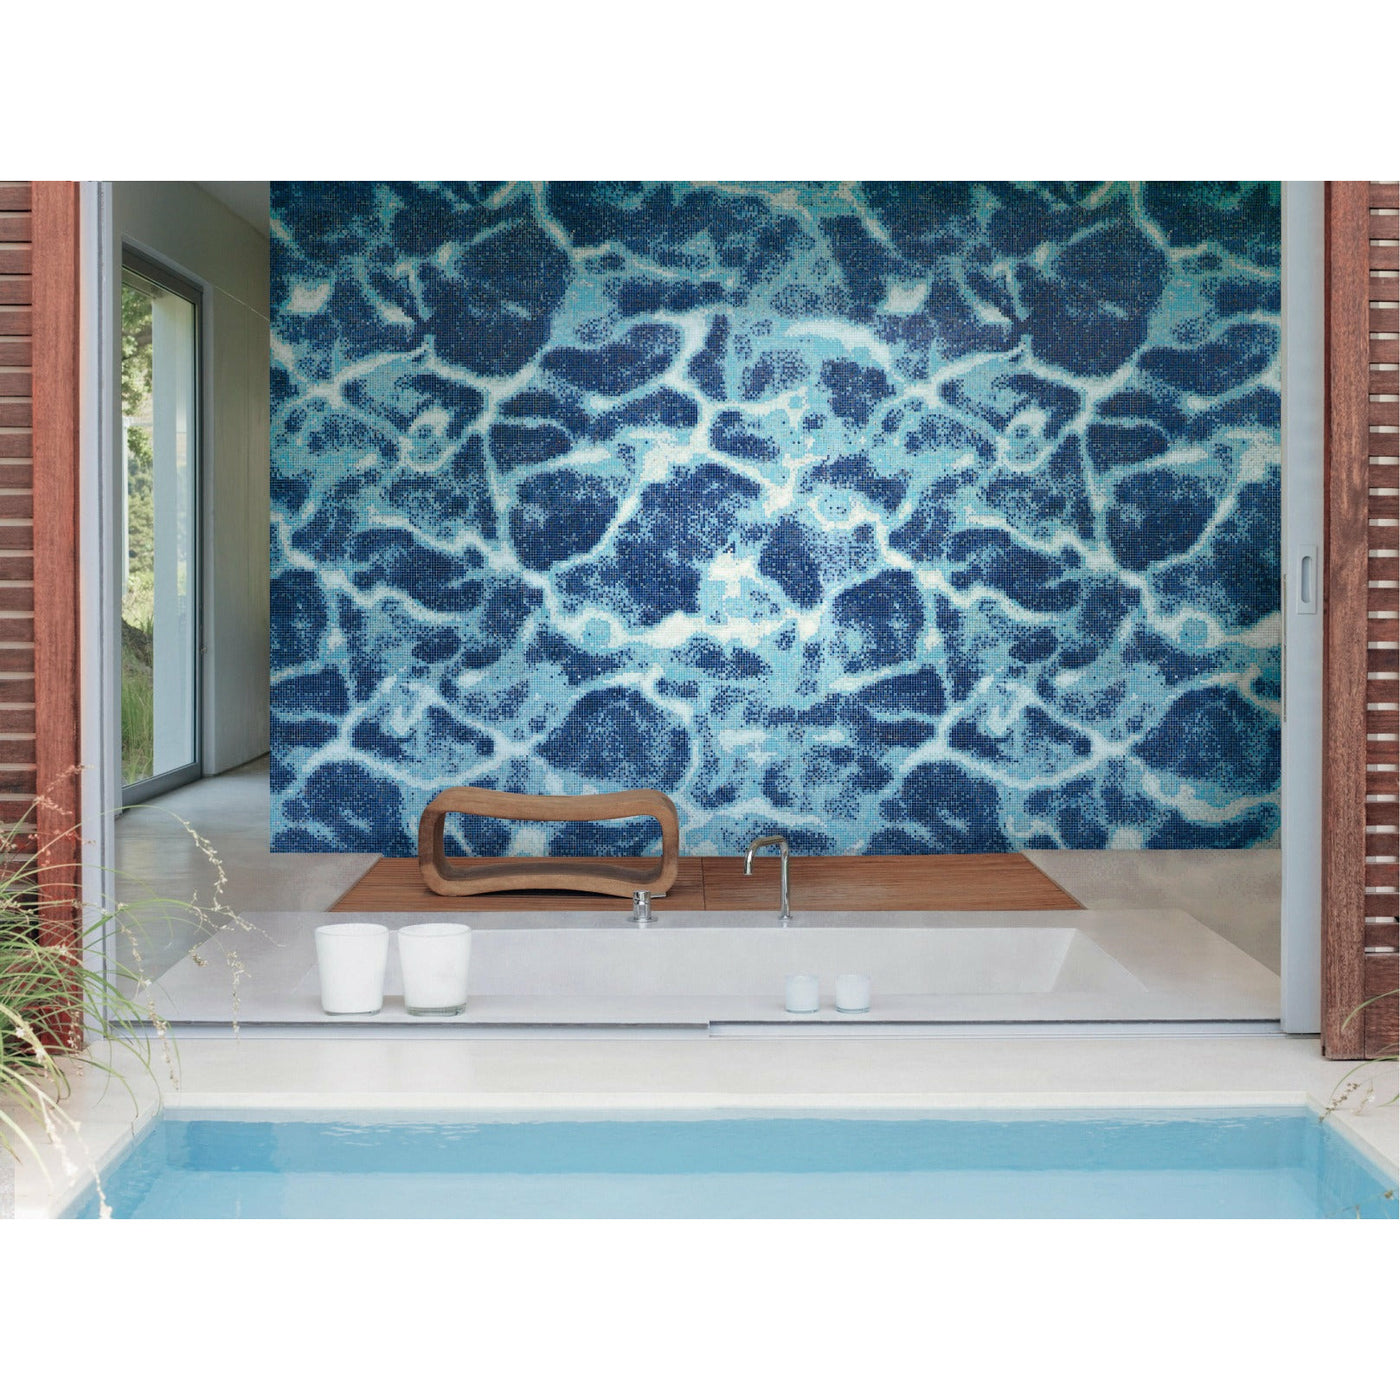 Bisazza Decorations 'Clear Water' Italian Glass Mosaic Tiles-5790